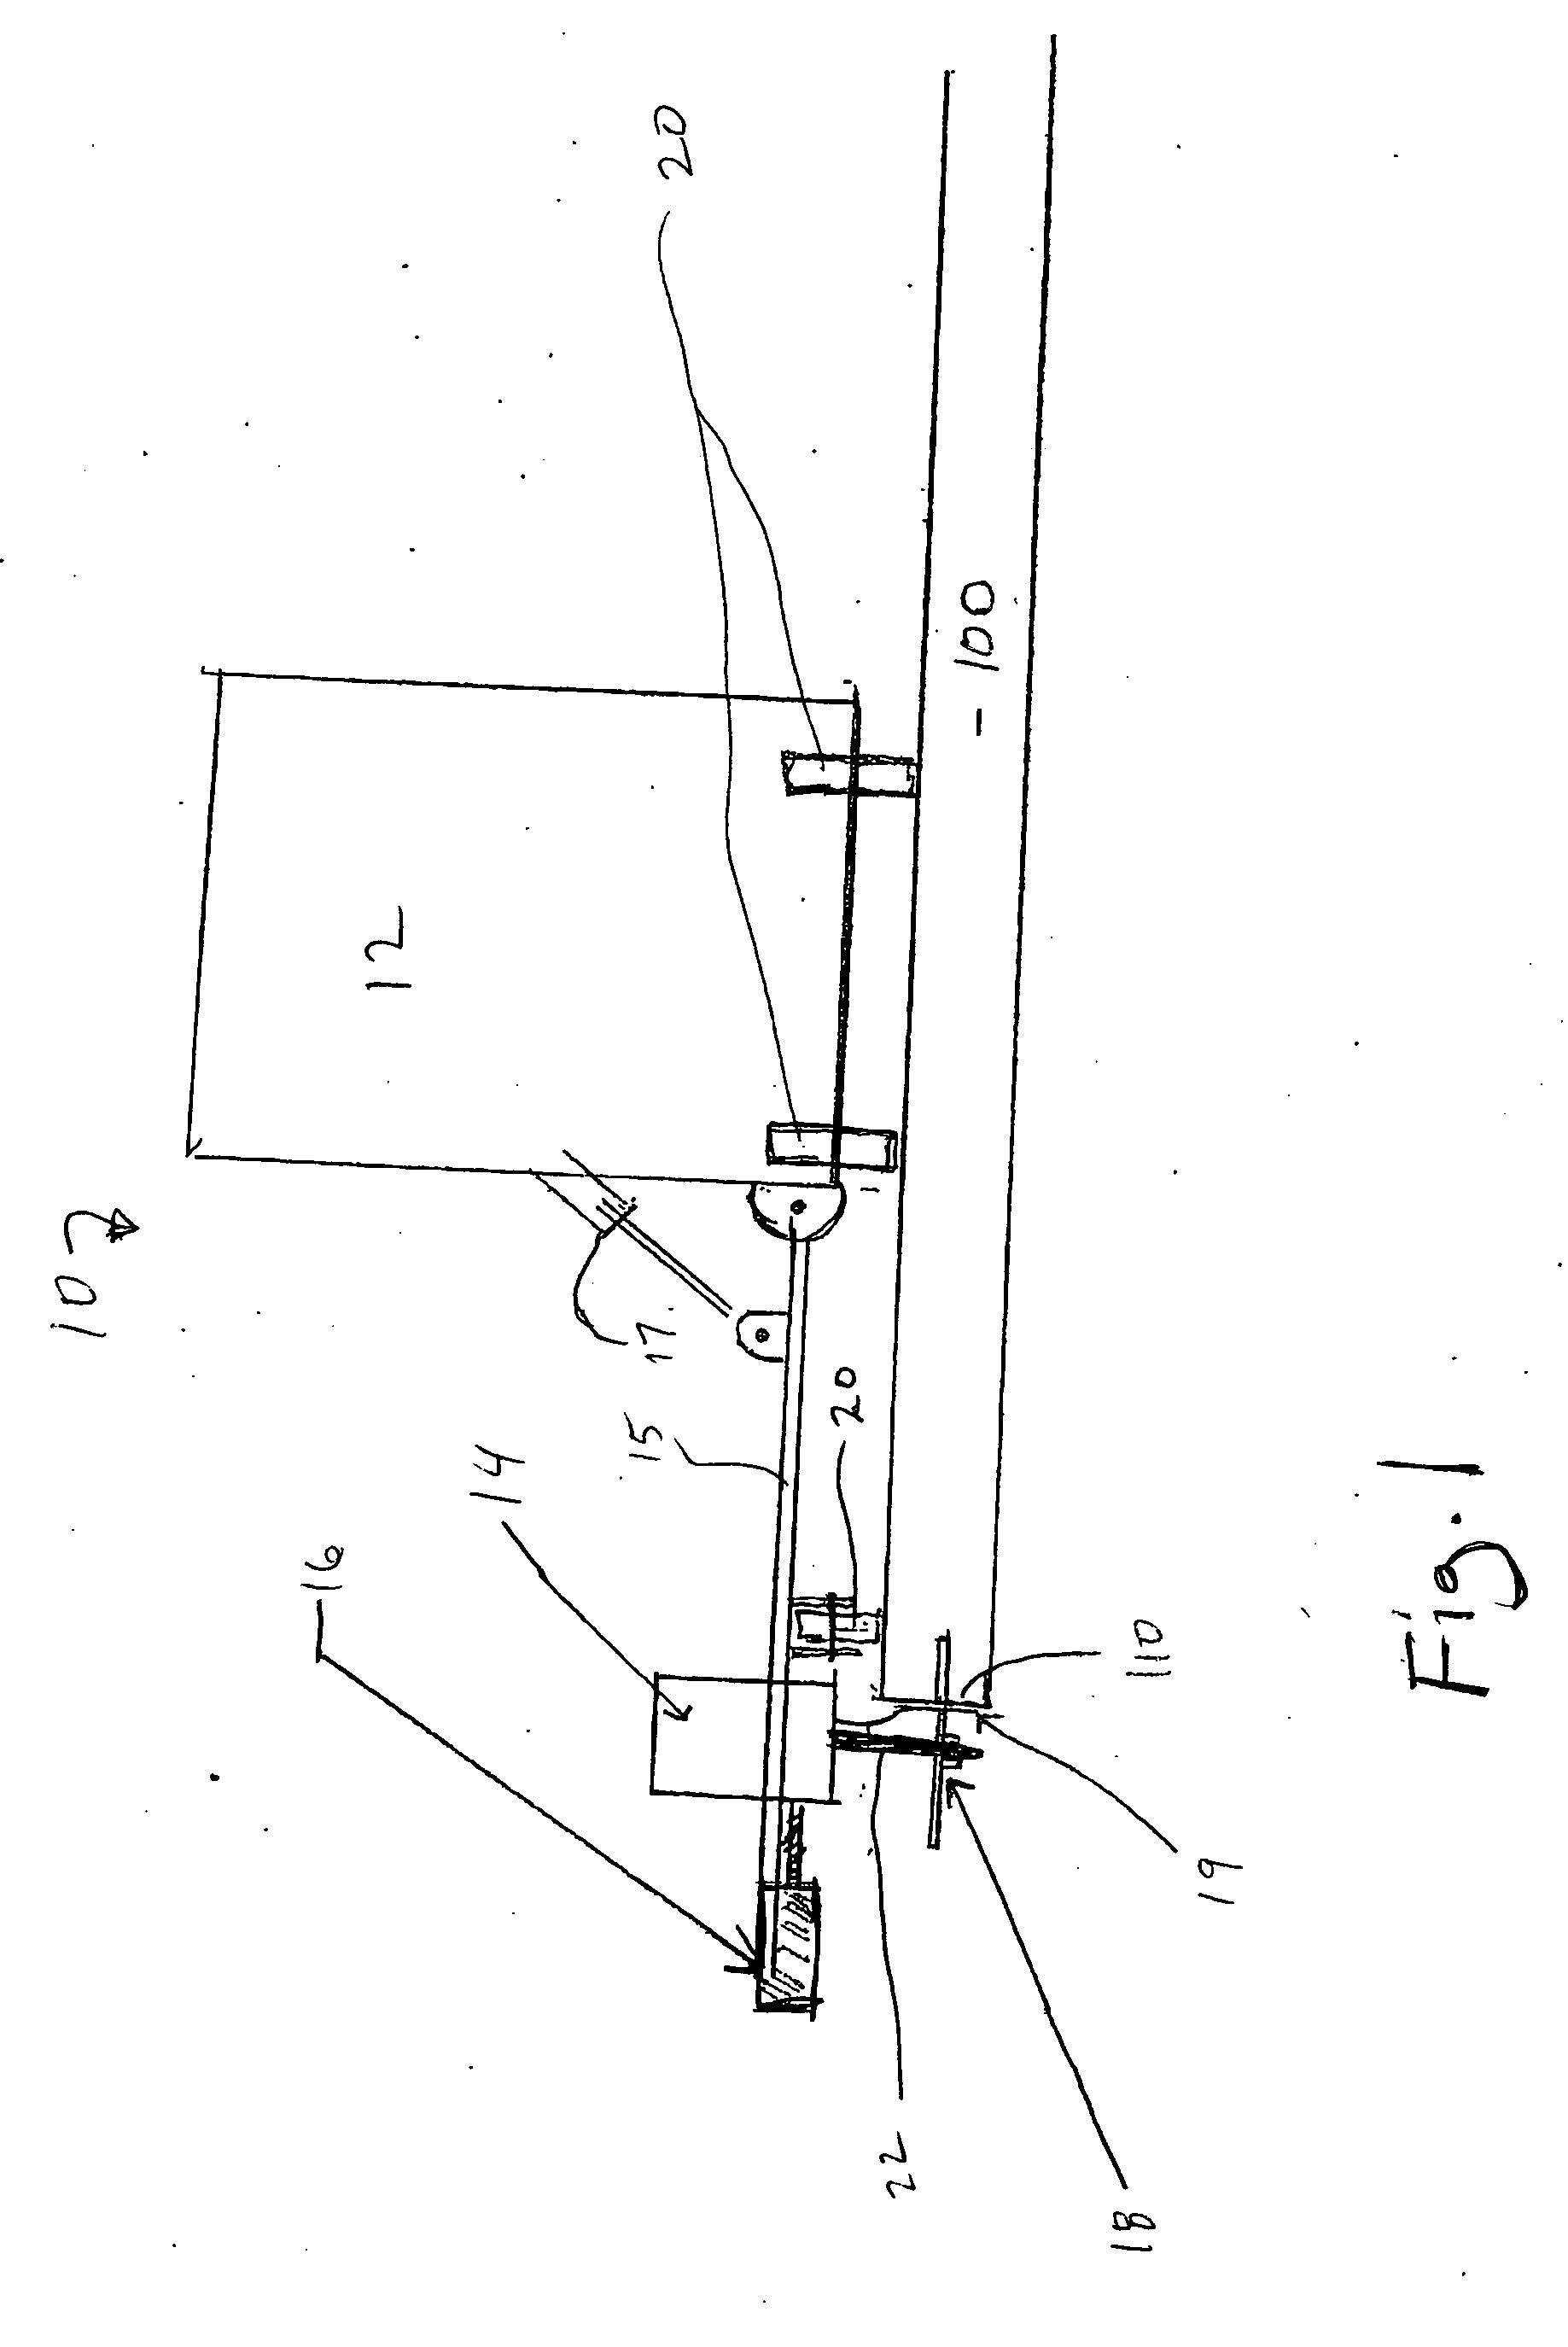 System and method for concrete slab connection